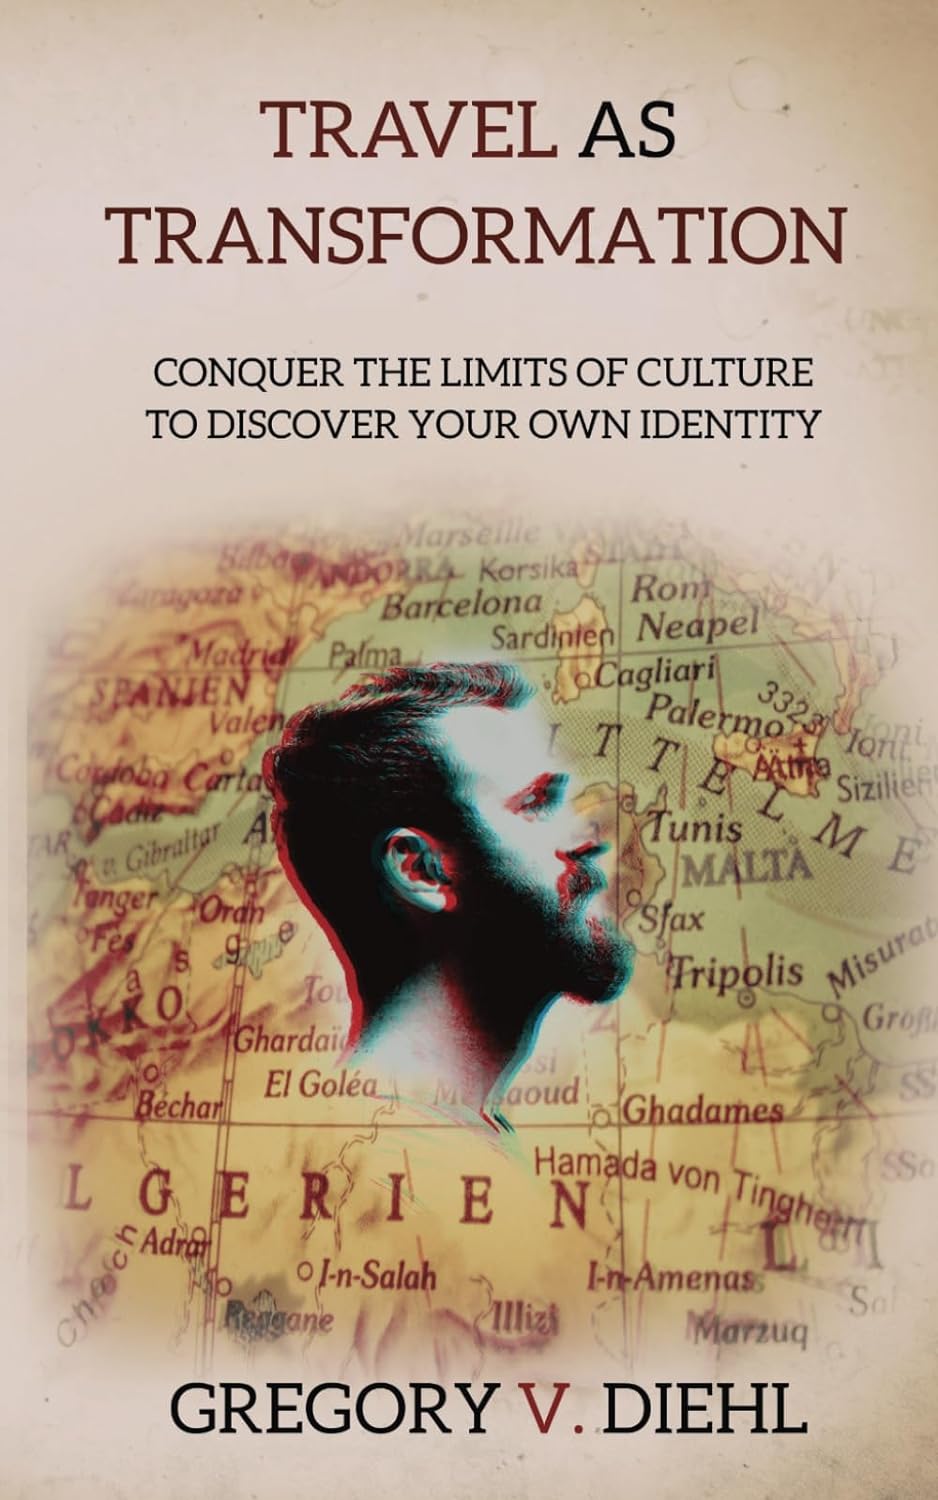 Travel as Transformation: Conquer the Limits of Culture to Discover Your Own Identity by Gregory Diehl 